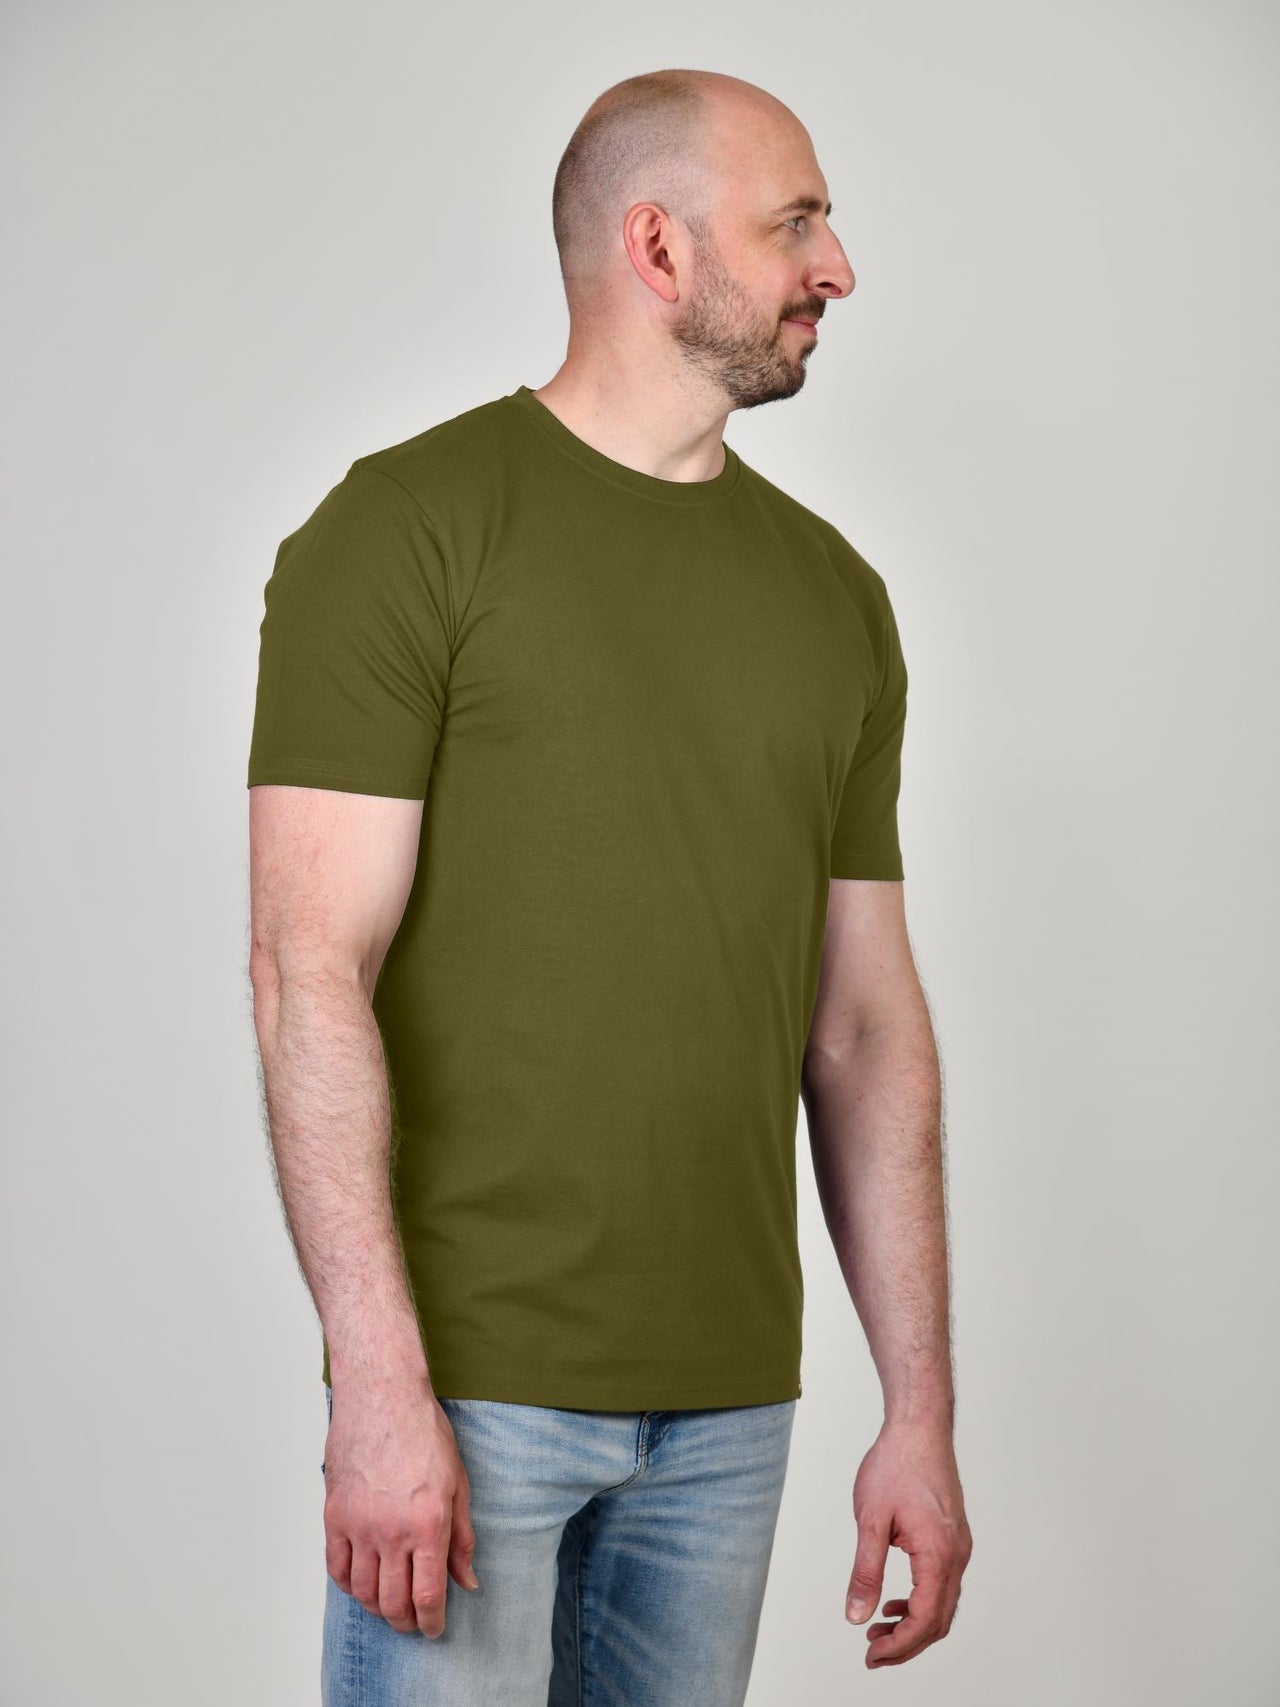 A tall athletic guy wearing a military green XL tall t-shirt and looking to the right.